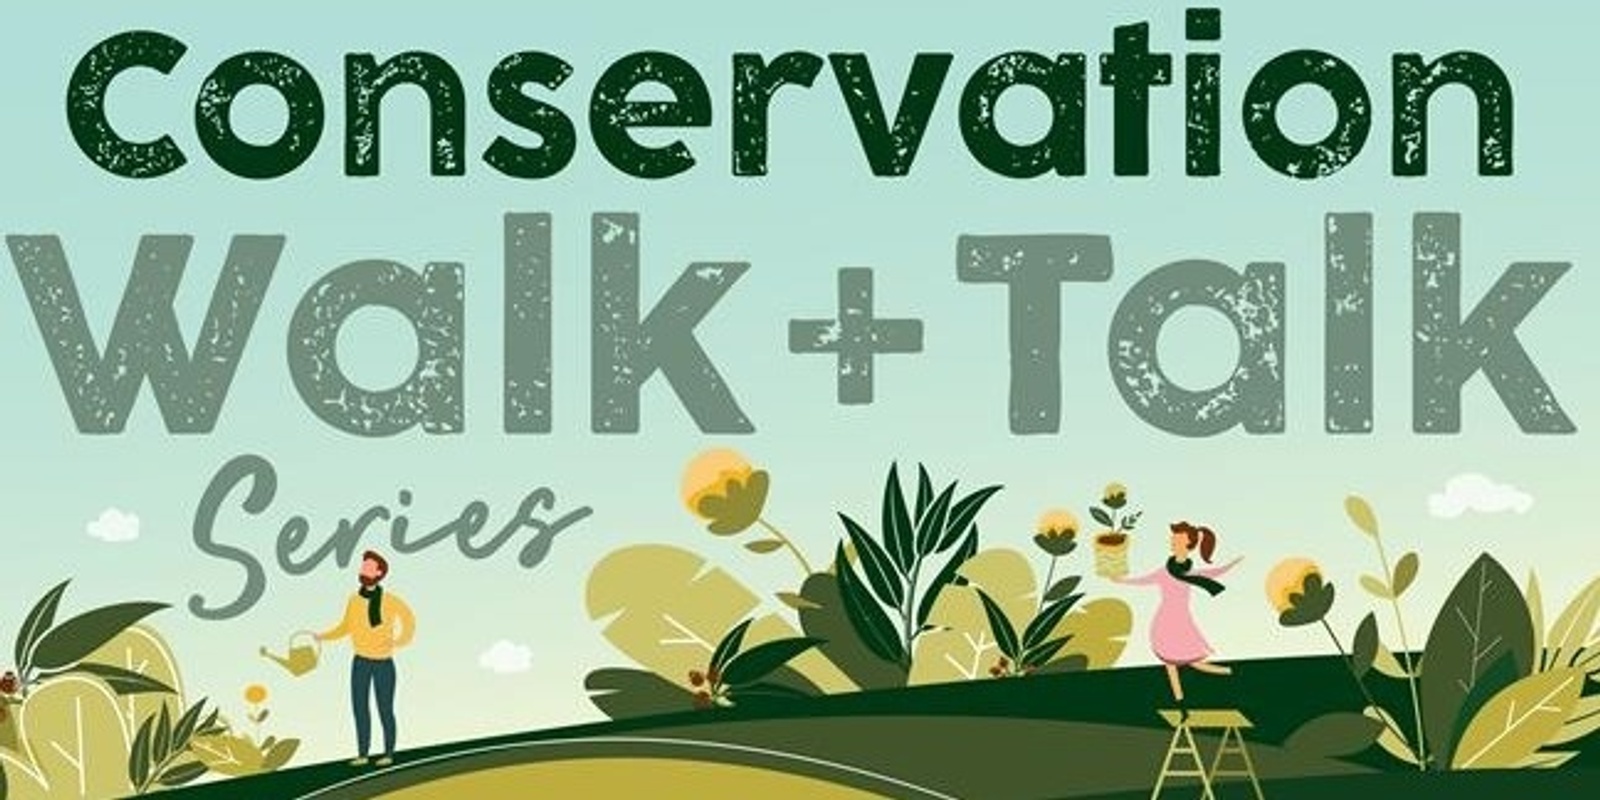 Banner image for What's that Euc, Scat and Track? - Conservation Walk and Talk Series (accessible)